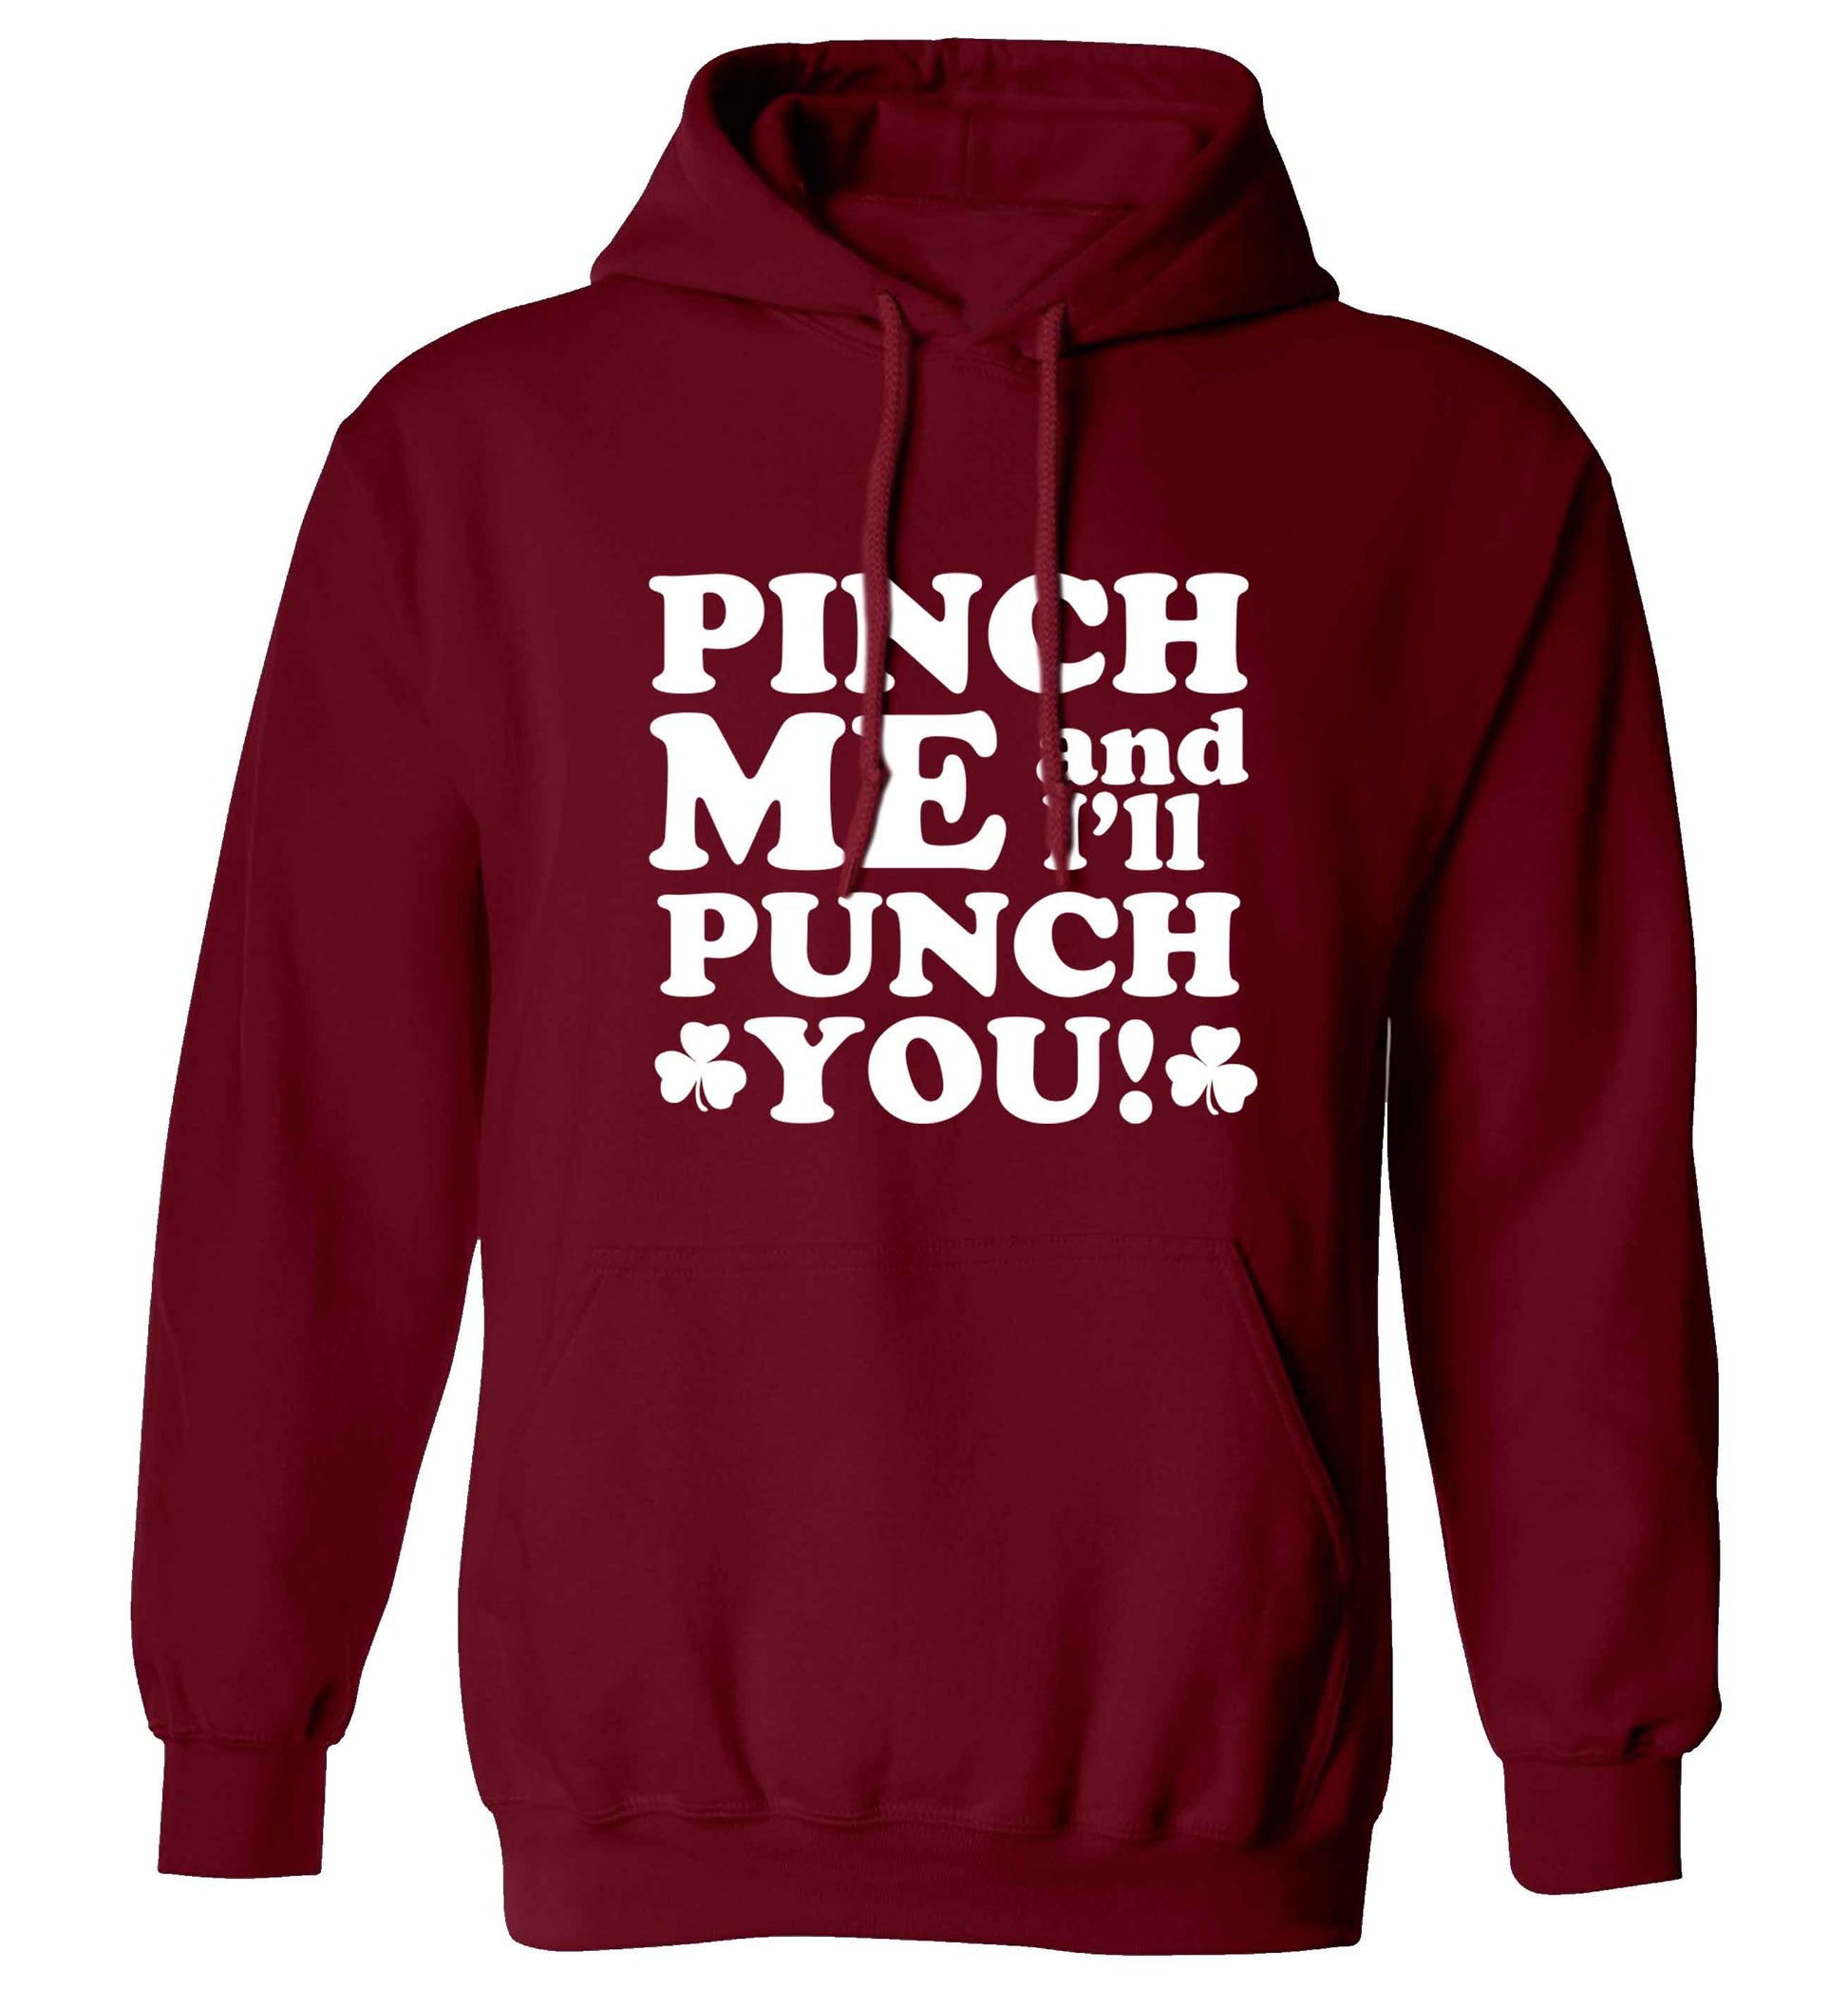 Pinch me and I'll punch you adults unisex maroon hoodie 2XL